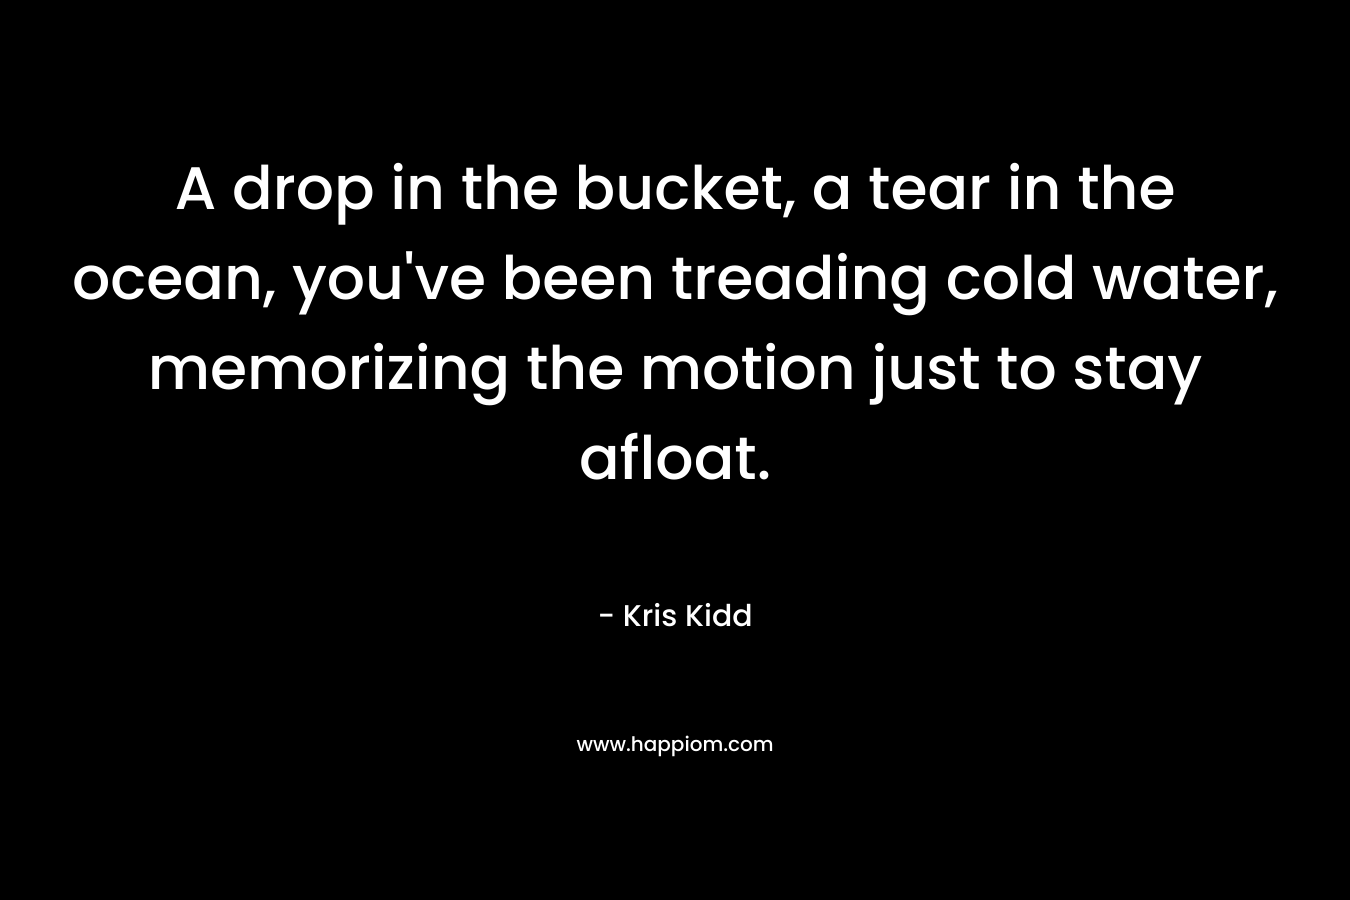 A drop in the bucket, a tear in the ocean, you’ve been treading cold water, memorizing the motion just to stay afloat. – Kris Kidd